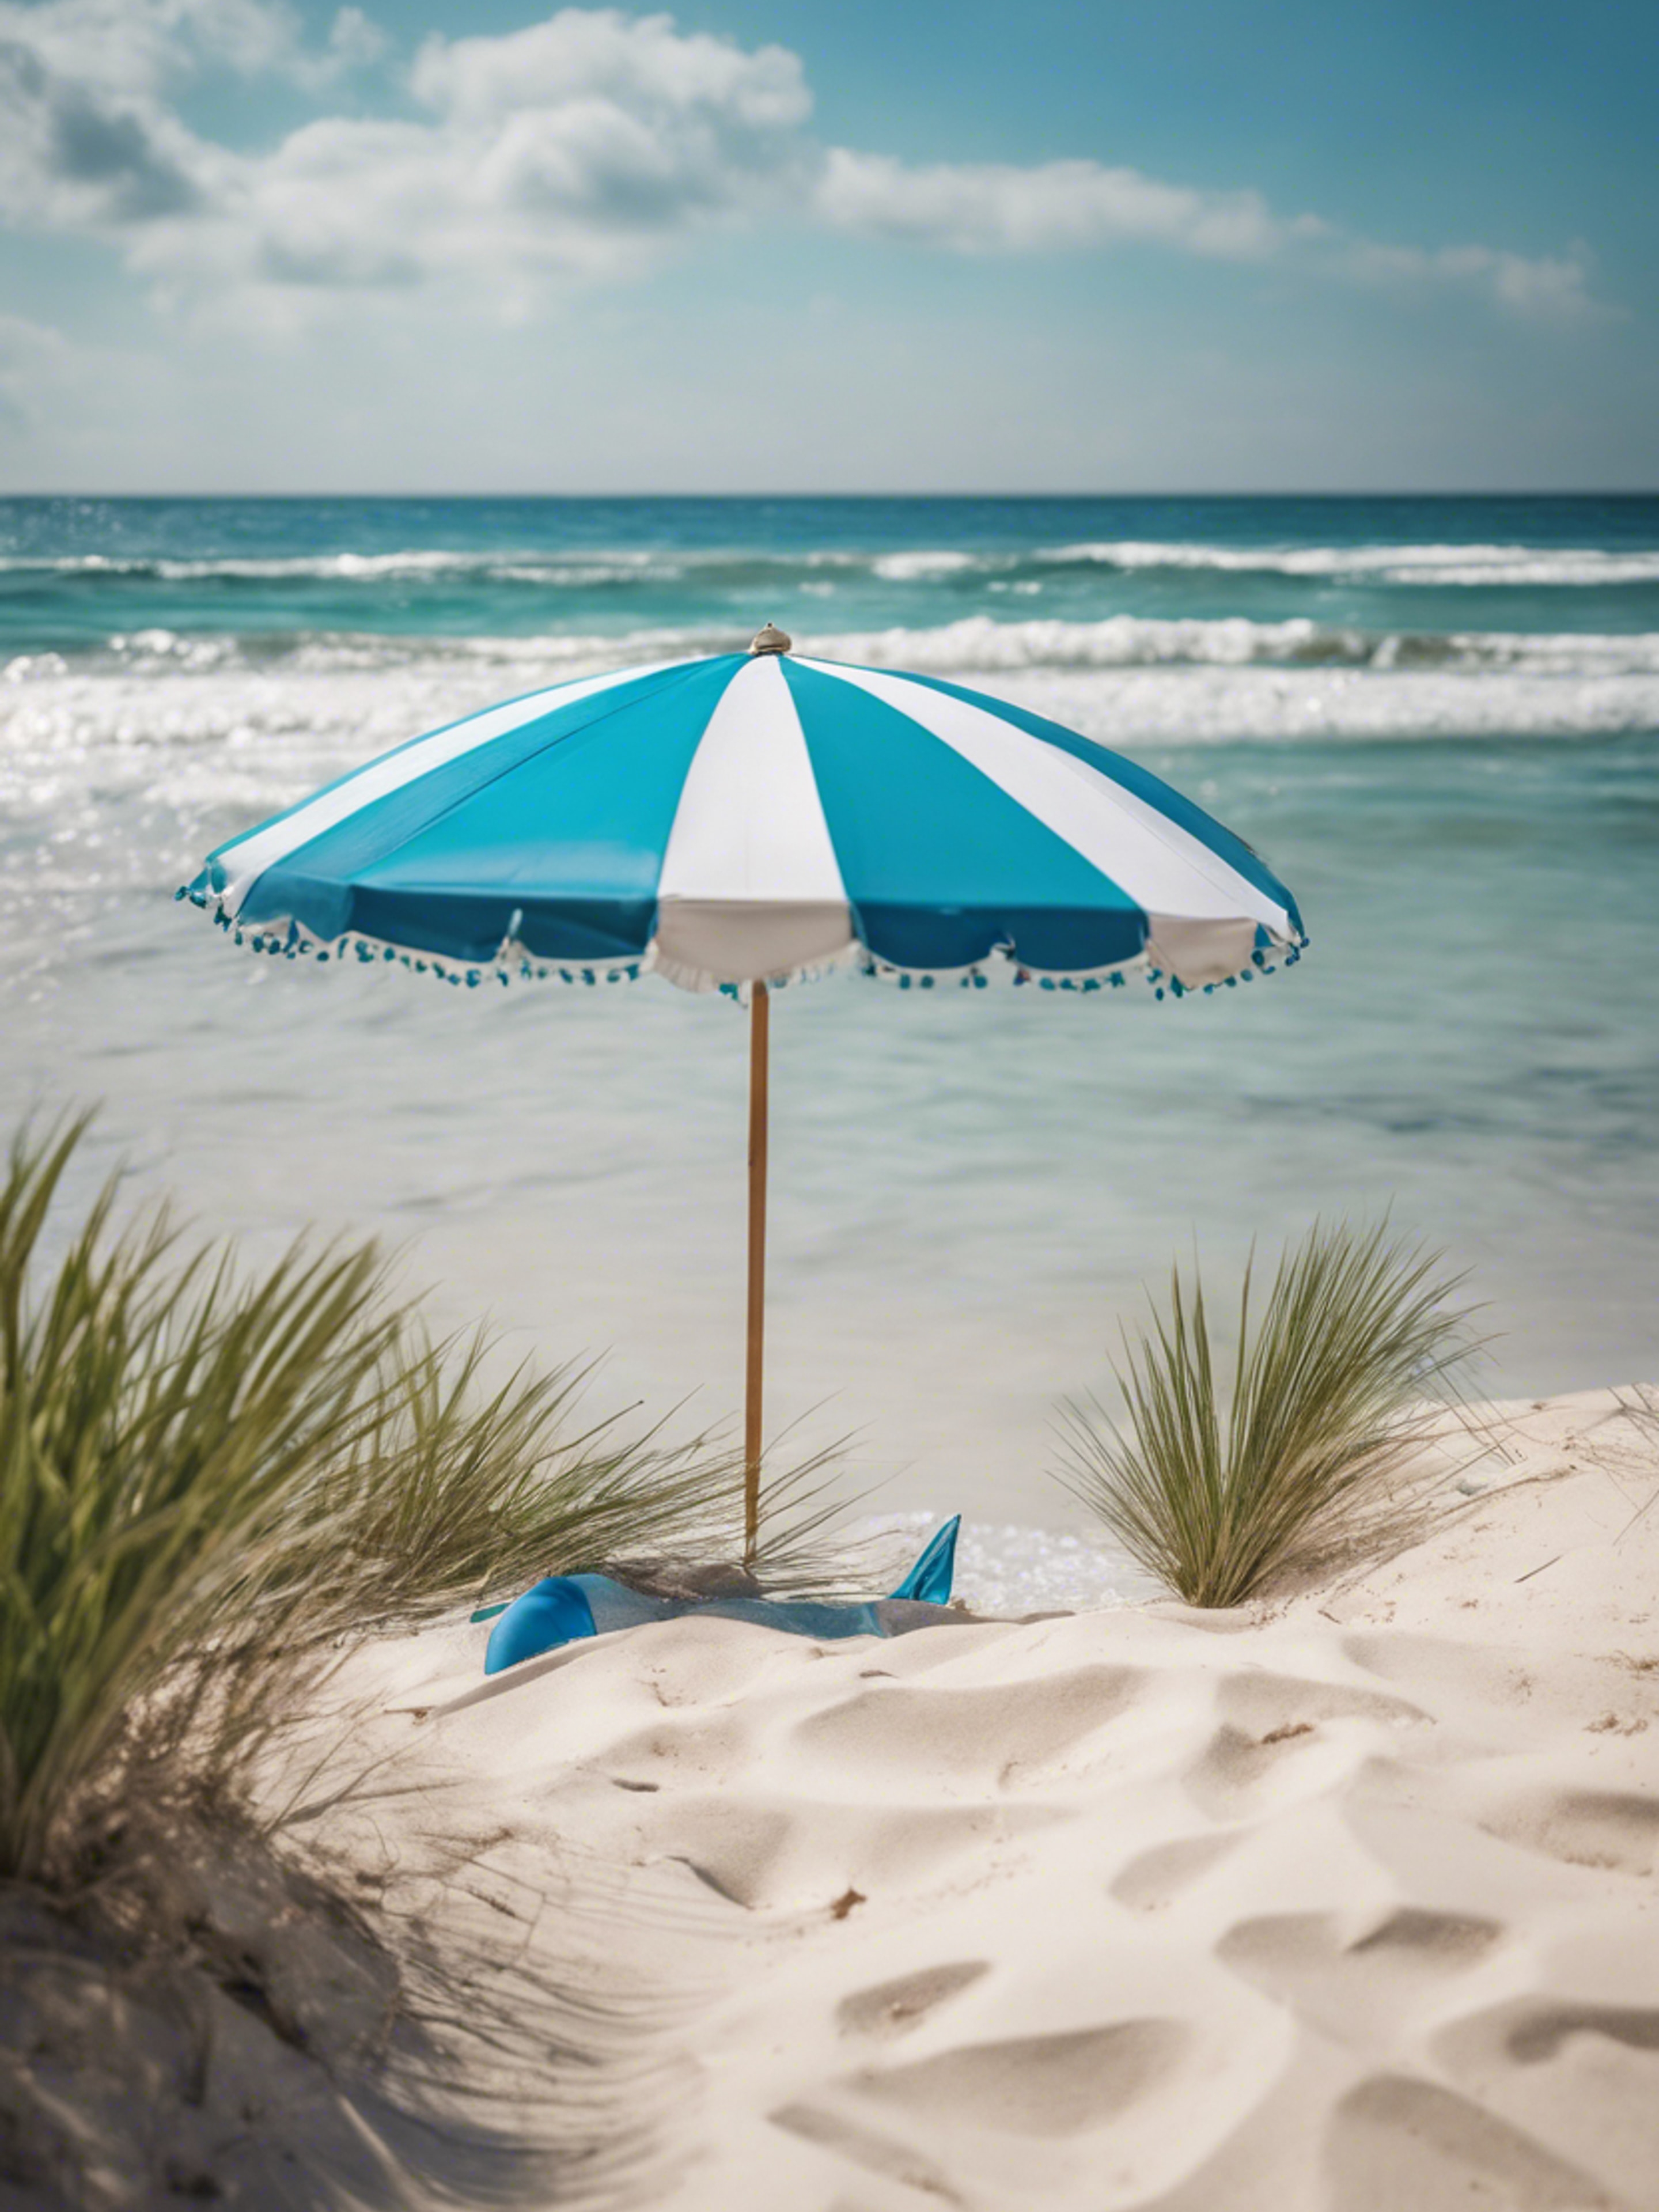 A scene at a beach, showing a blue and white striped beach umbrella, white sand, and turquoise sea beyond. Wallpaper[4f2cdd4fe2f04b5cb3be]